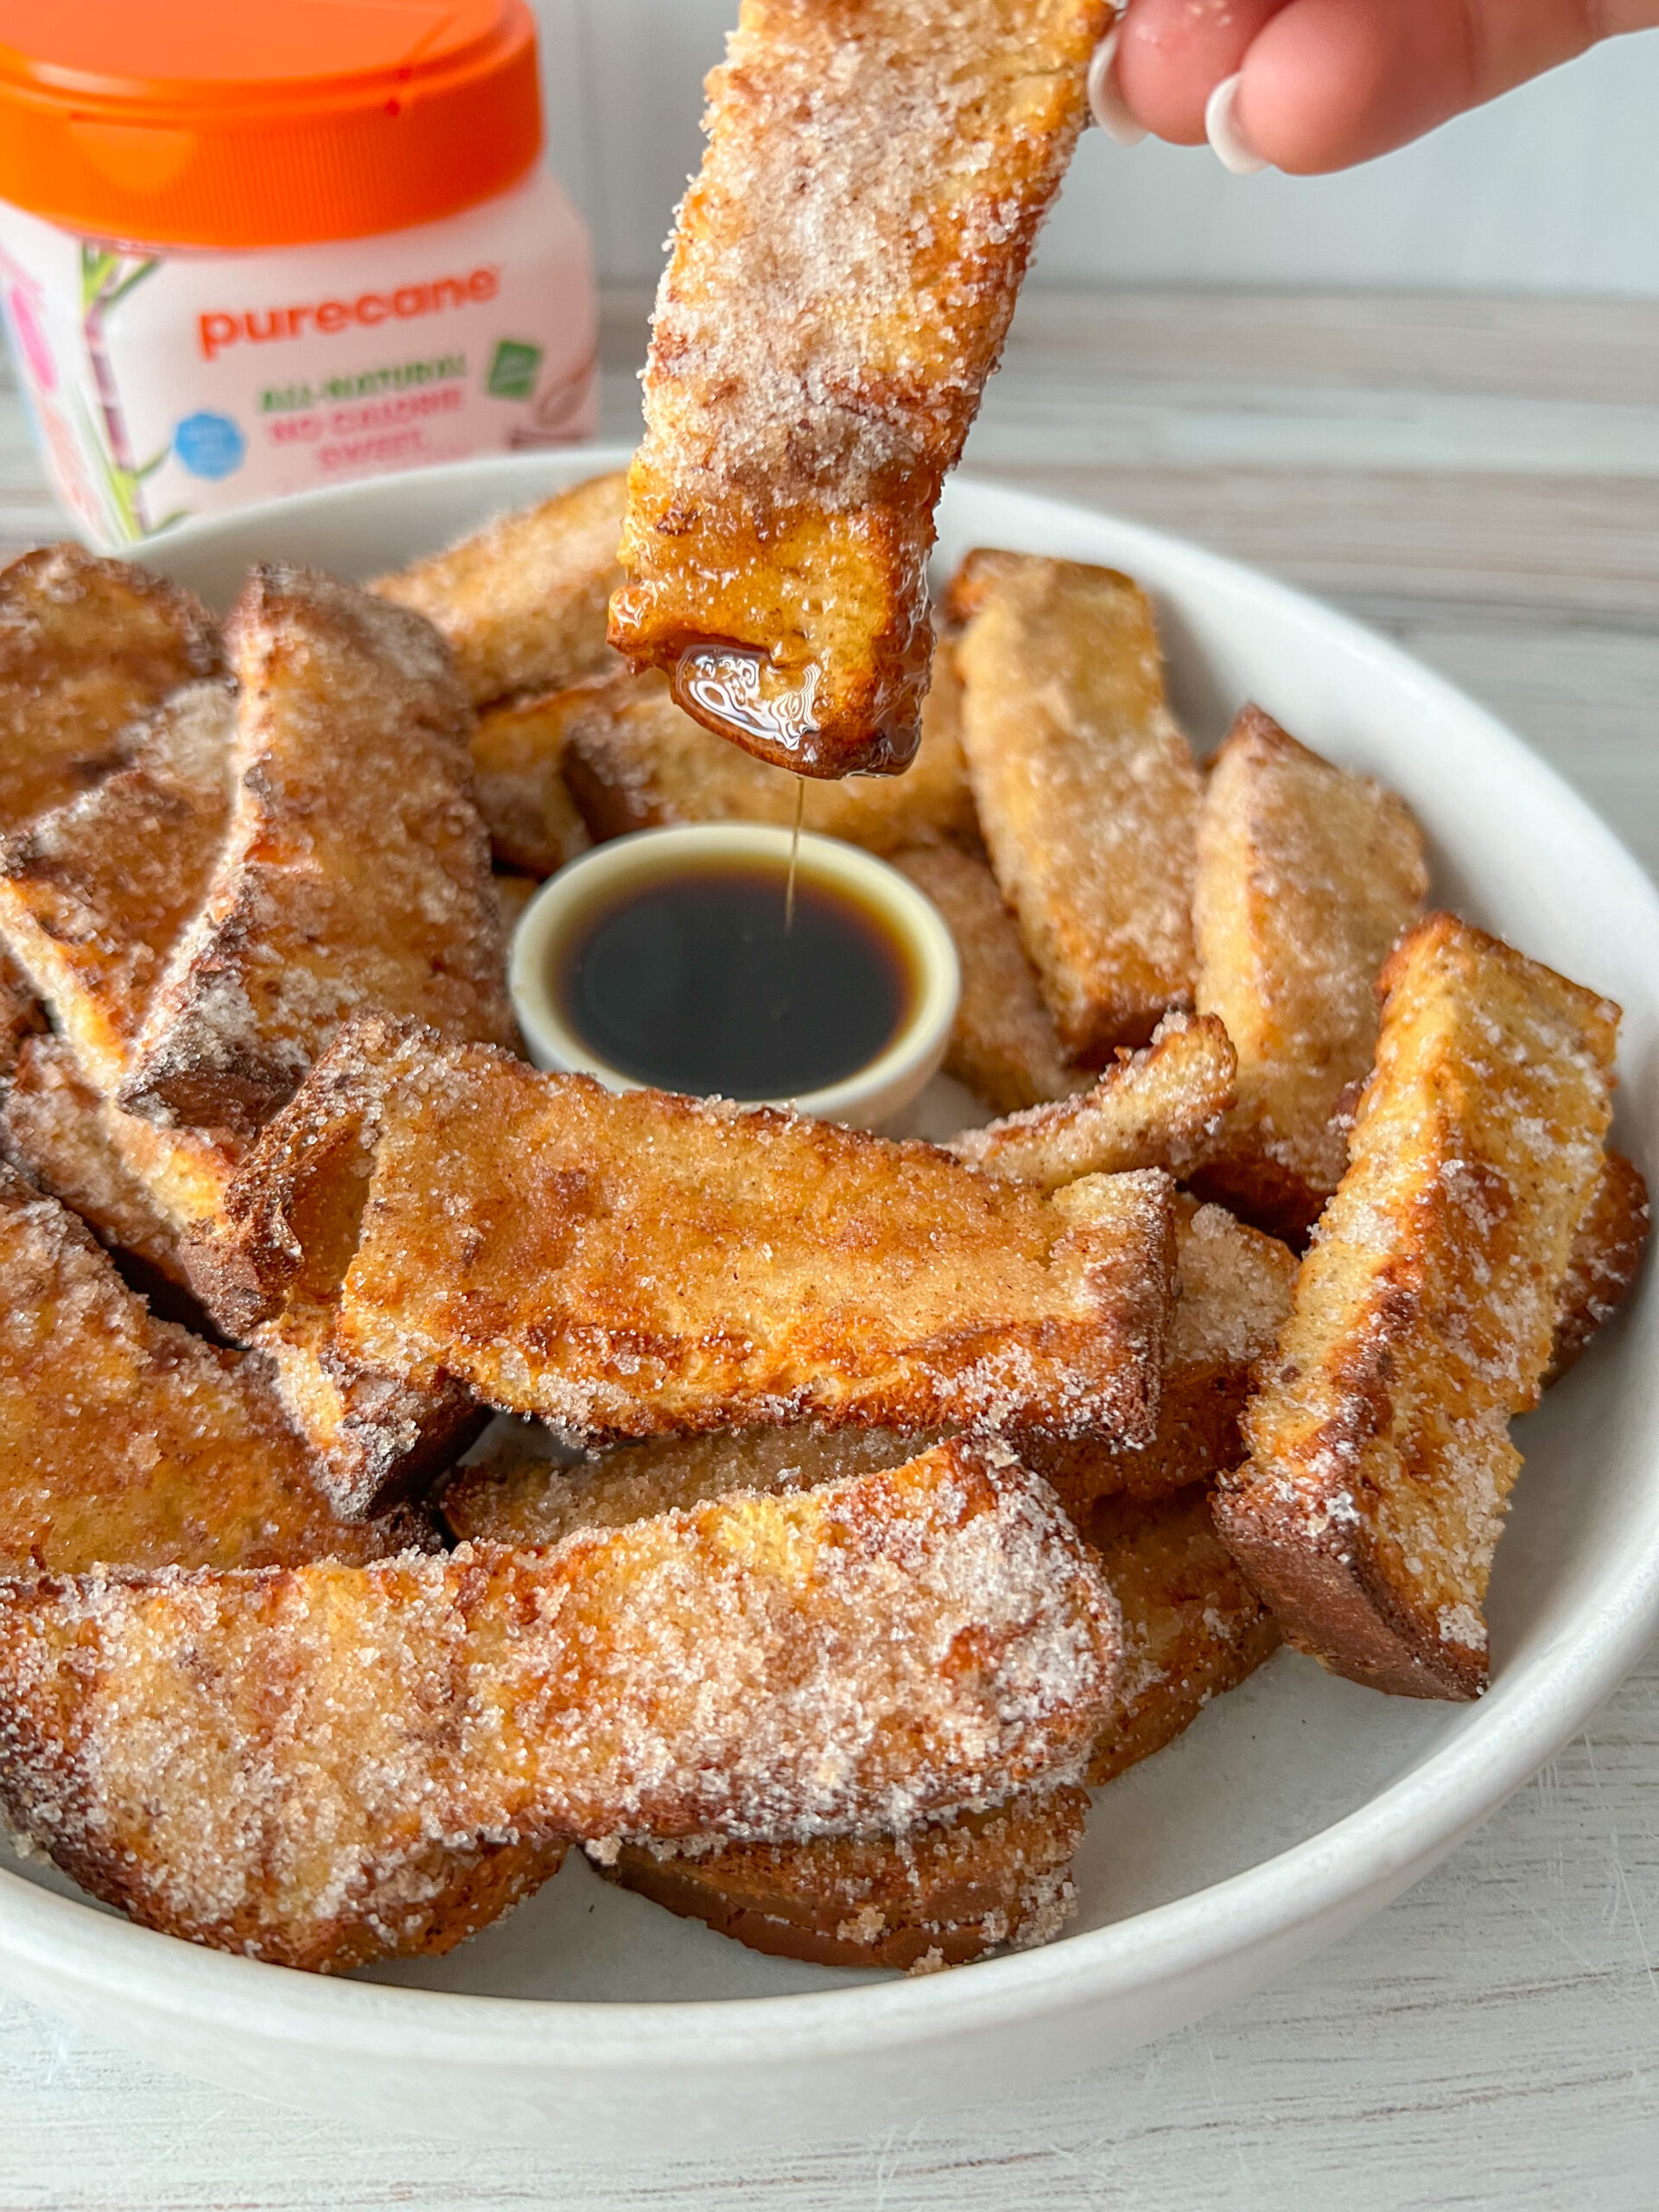 Dipping air fryer french toast sticks into maple syrup.